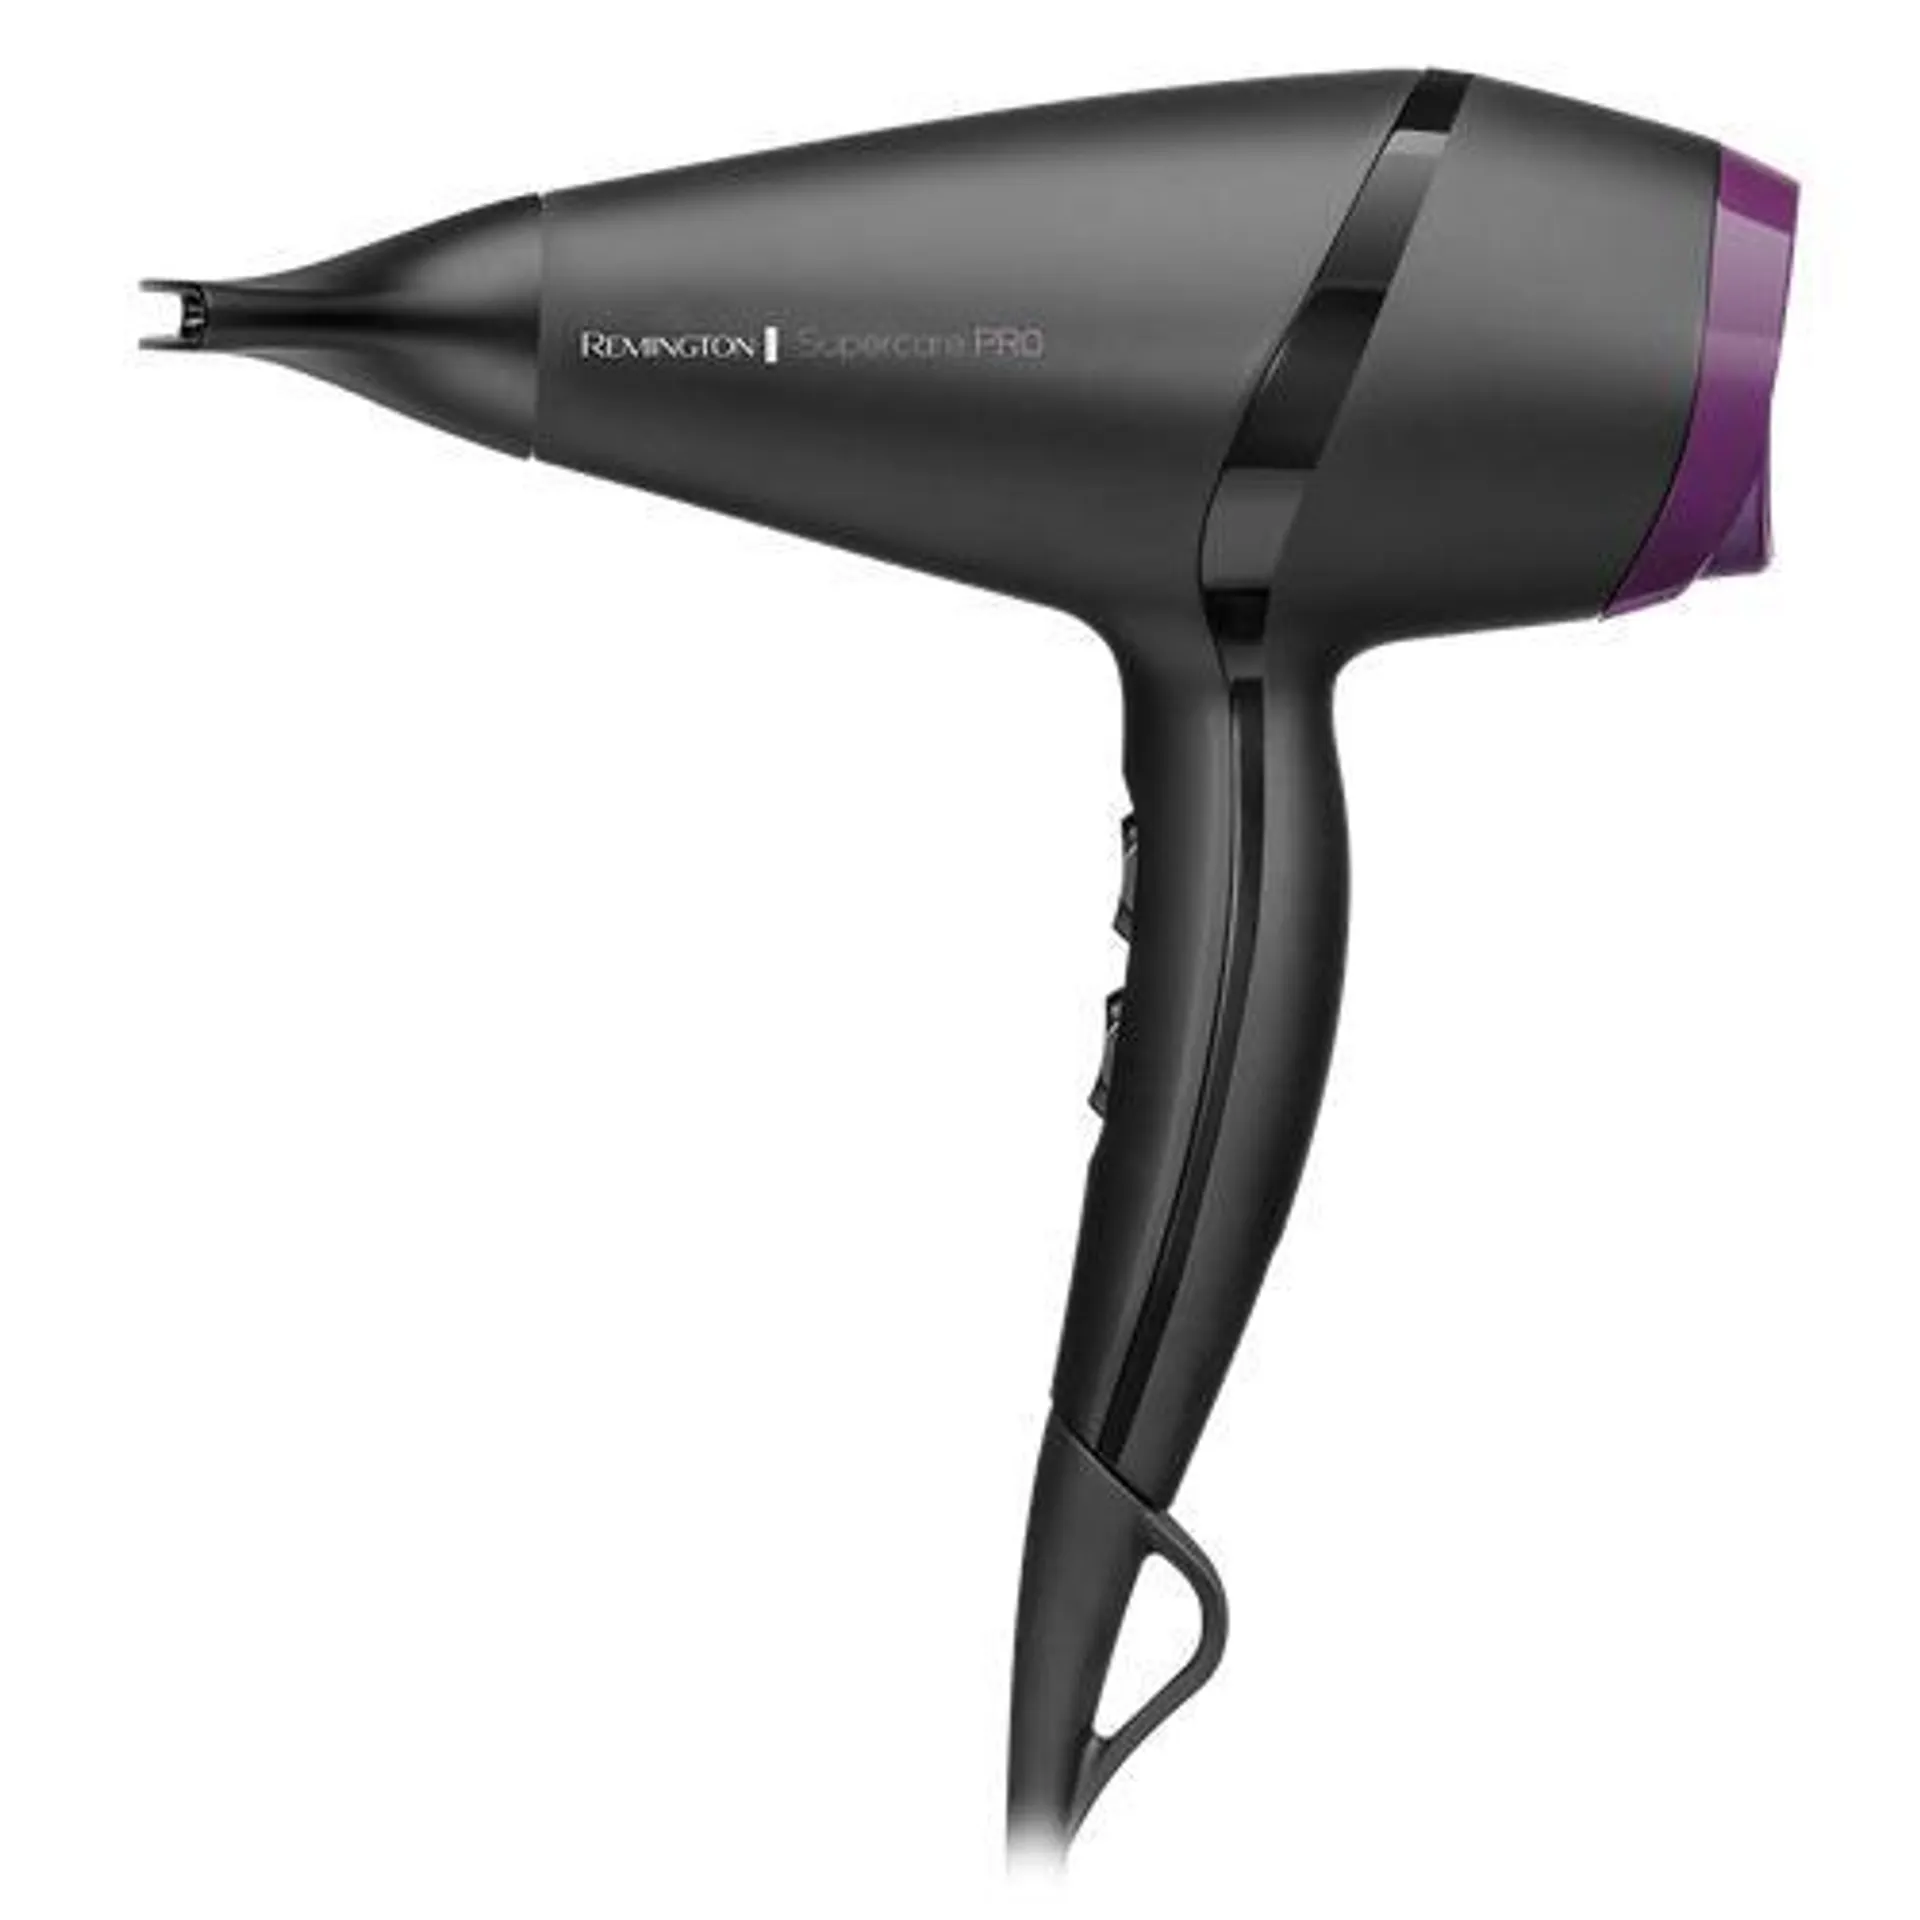 REMINGTON PRO2100 SUPERCARE HAIR DRYER WITH AC MOTOR